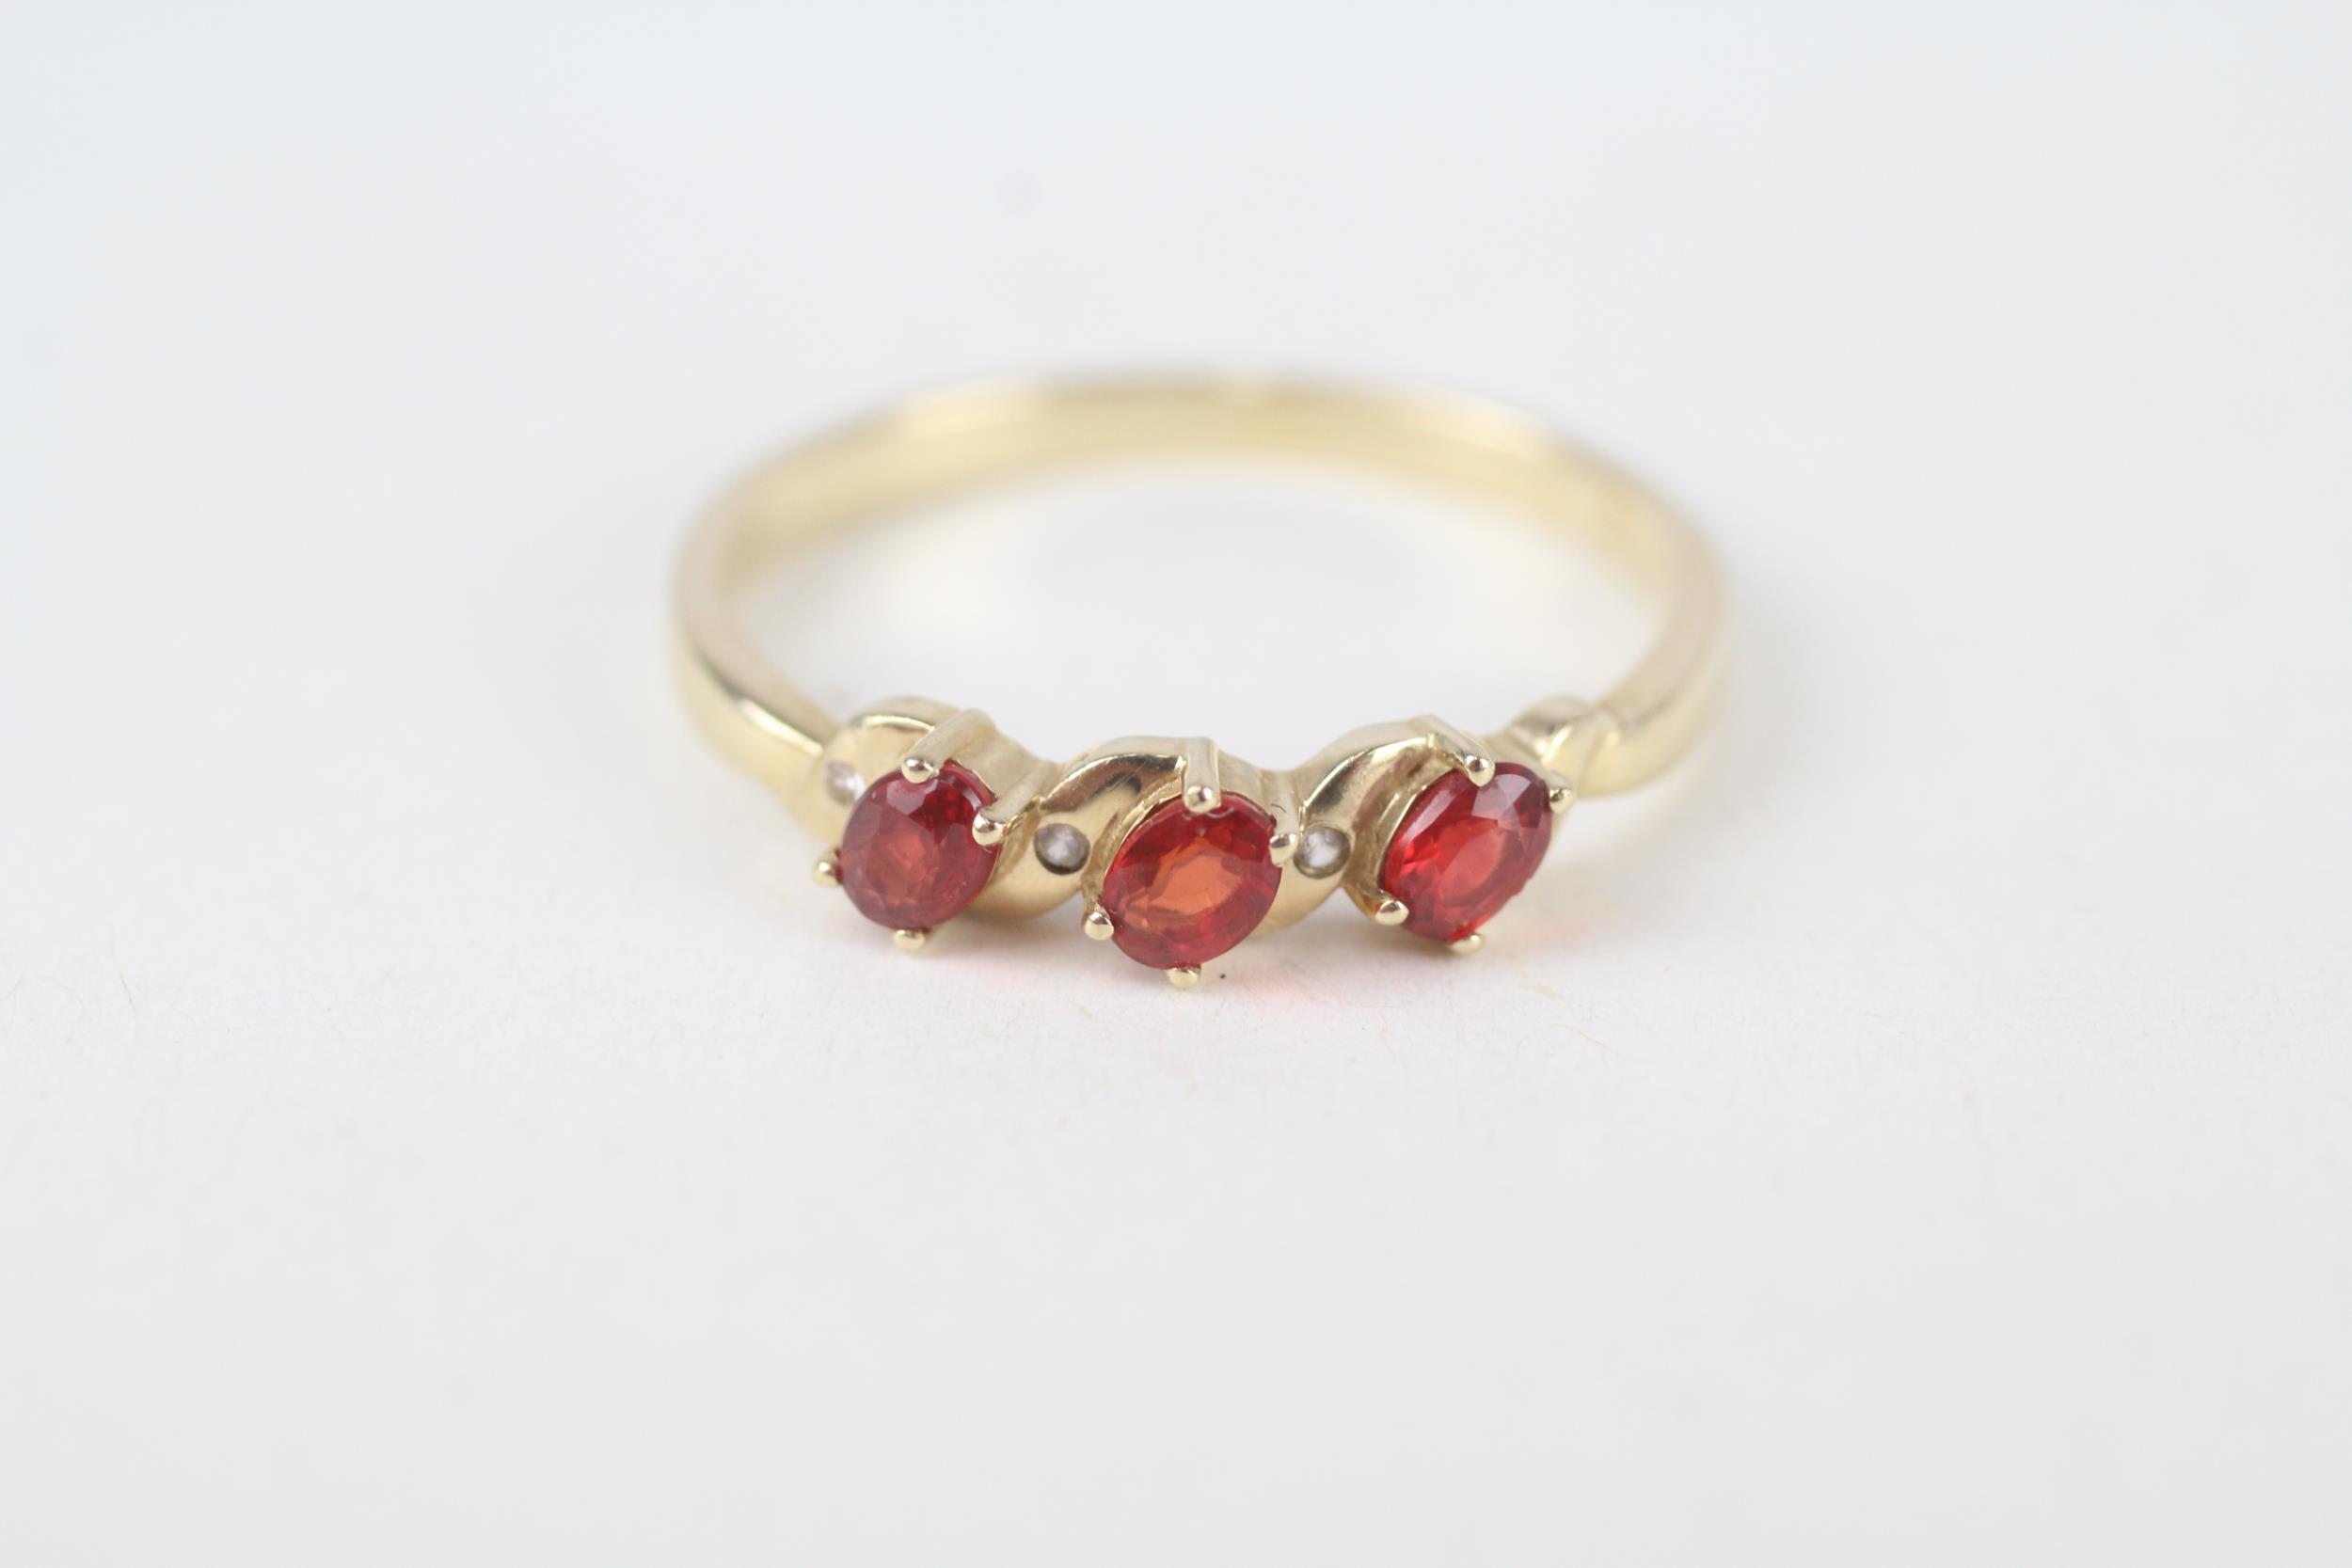 9ct gold red gemstone three stone ring with white gemstone accent Size T 2 g - Image 2 of 5